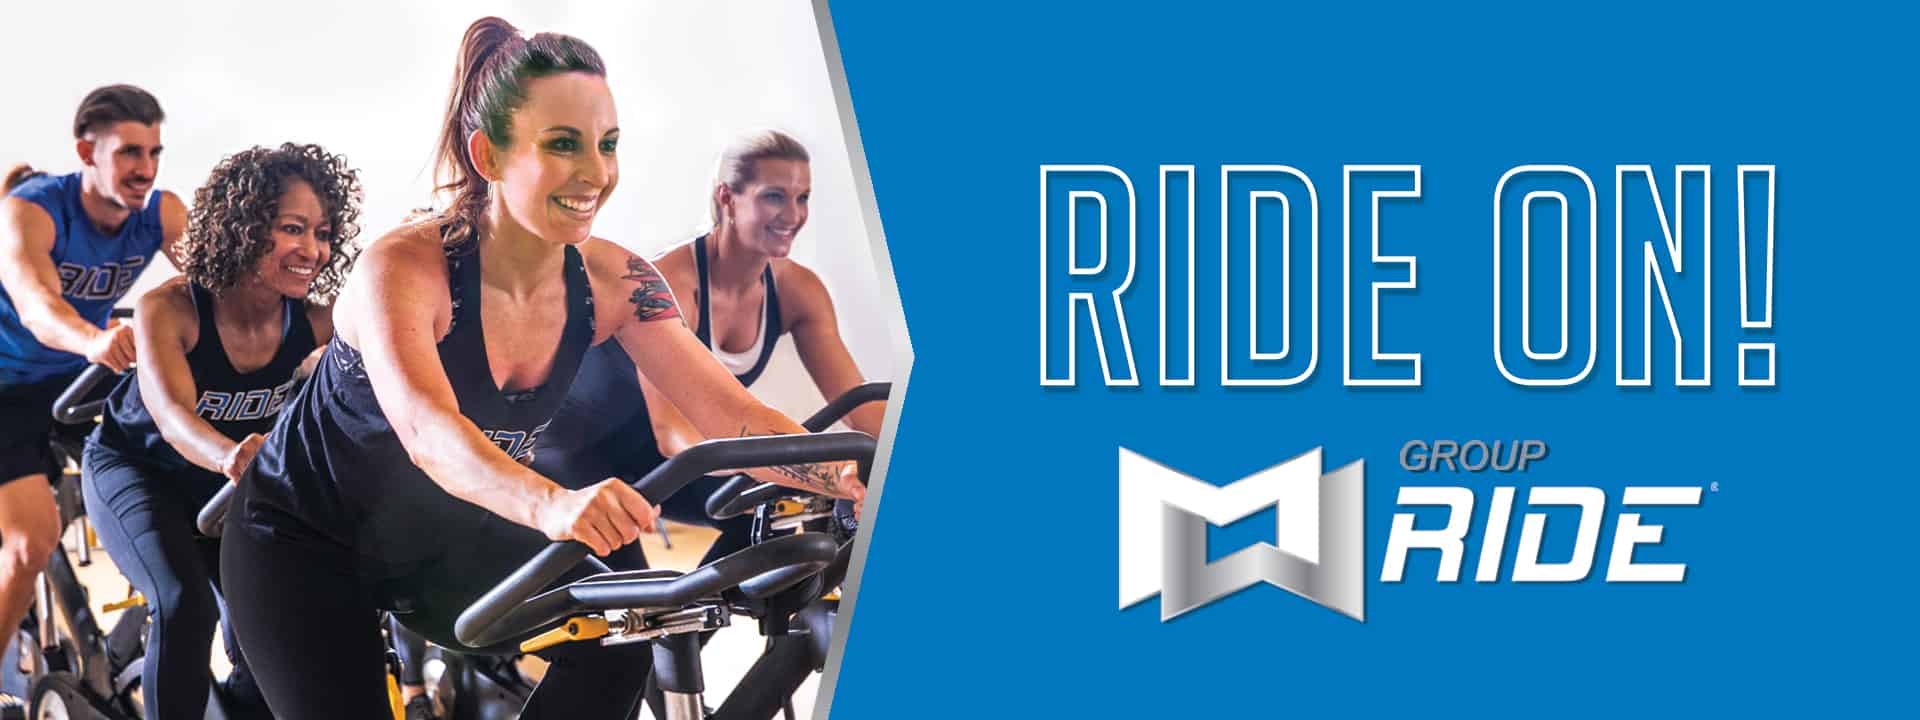 Group Ride exercise class